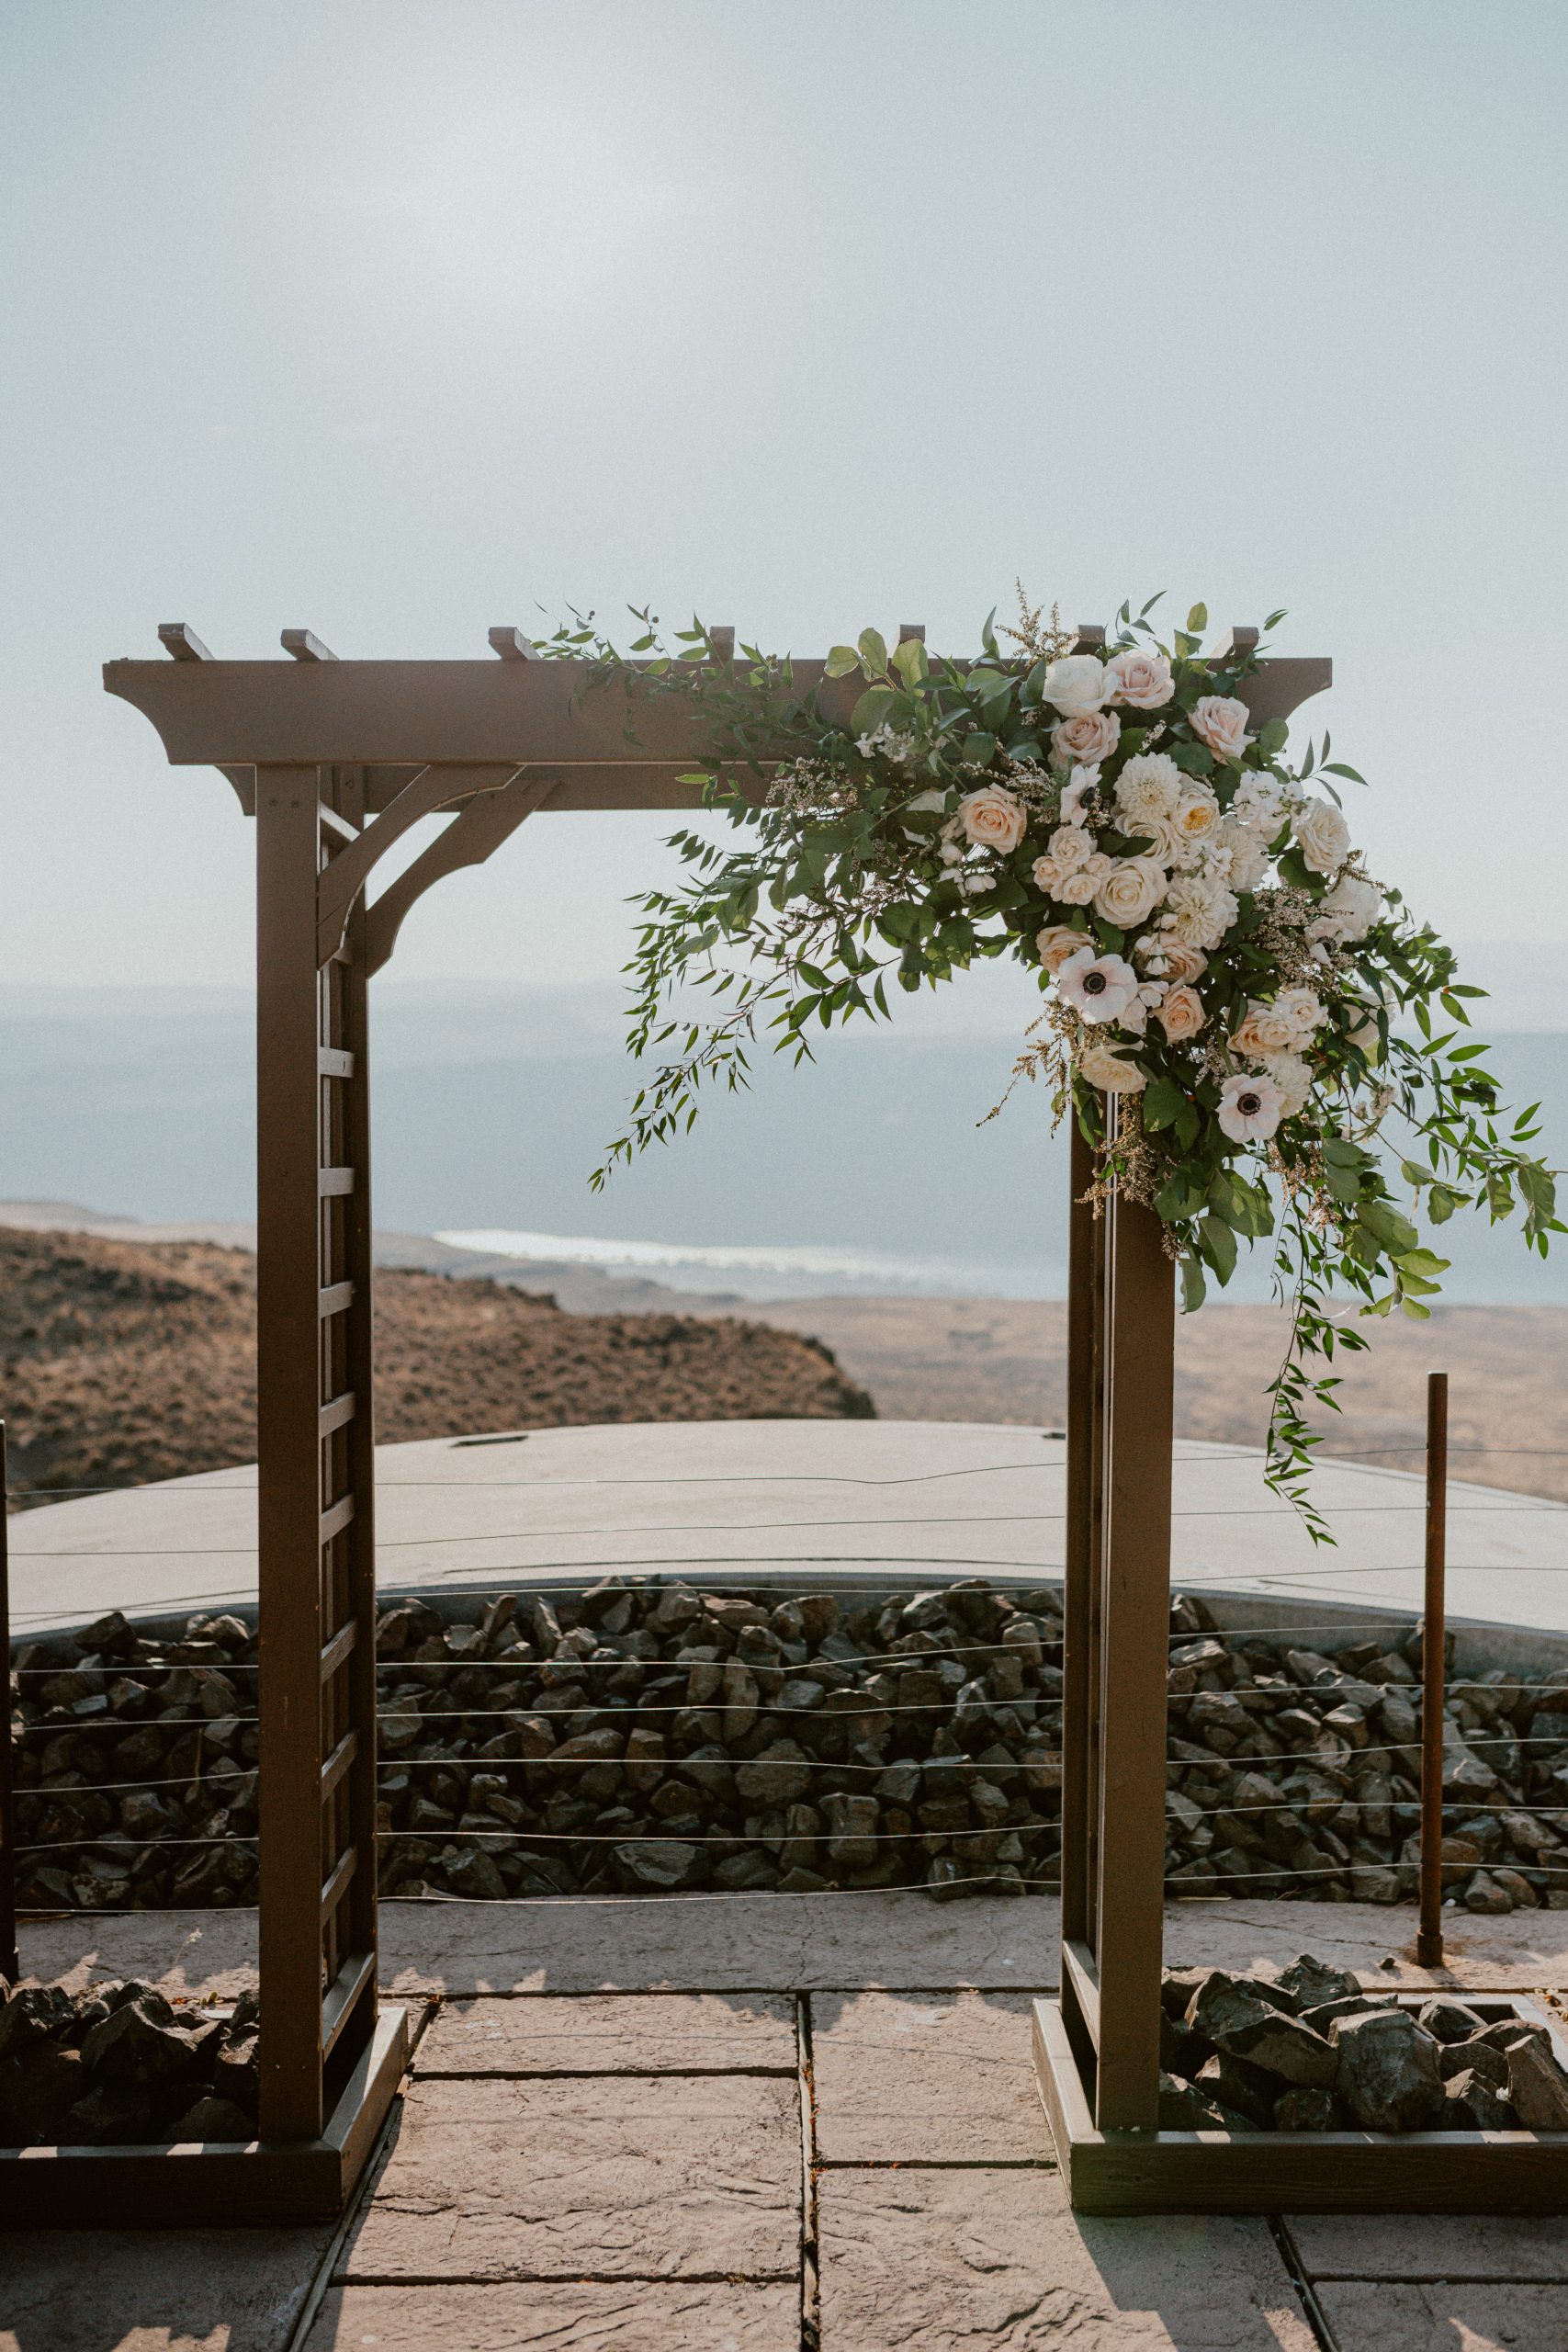 Wedding day floral inspiration with white florals and arch overlooking the ocean for Fall PNW wedding inspiration | Washington Elopement, Destination Elopement Photographer, Cave B Inn Elopement Inspiration, Washington Elopement ideas, PNW Fall Wedding Inspiration, Fall Outdoor Wedding Ideas,Fall Wedding Inspiration, PNW Outdoor Wedding Ideas | chelseaabril.com